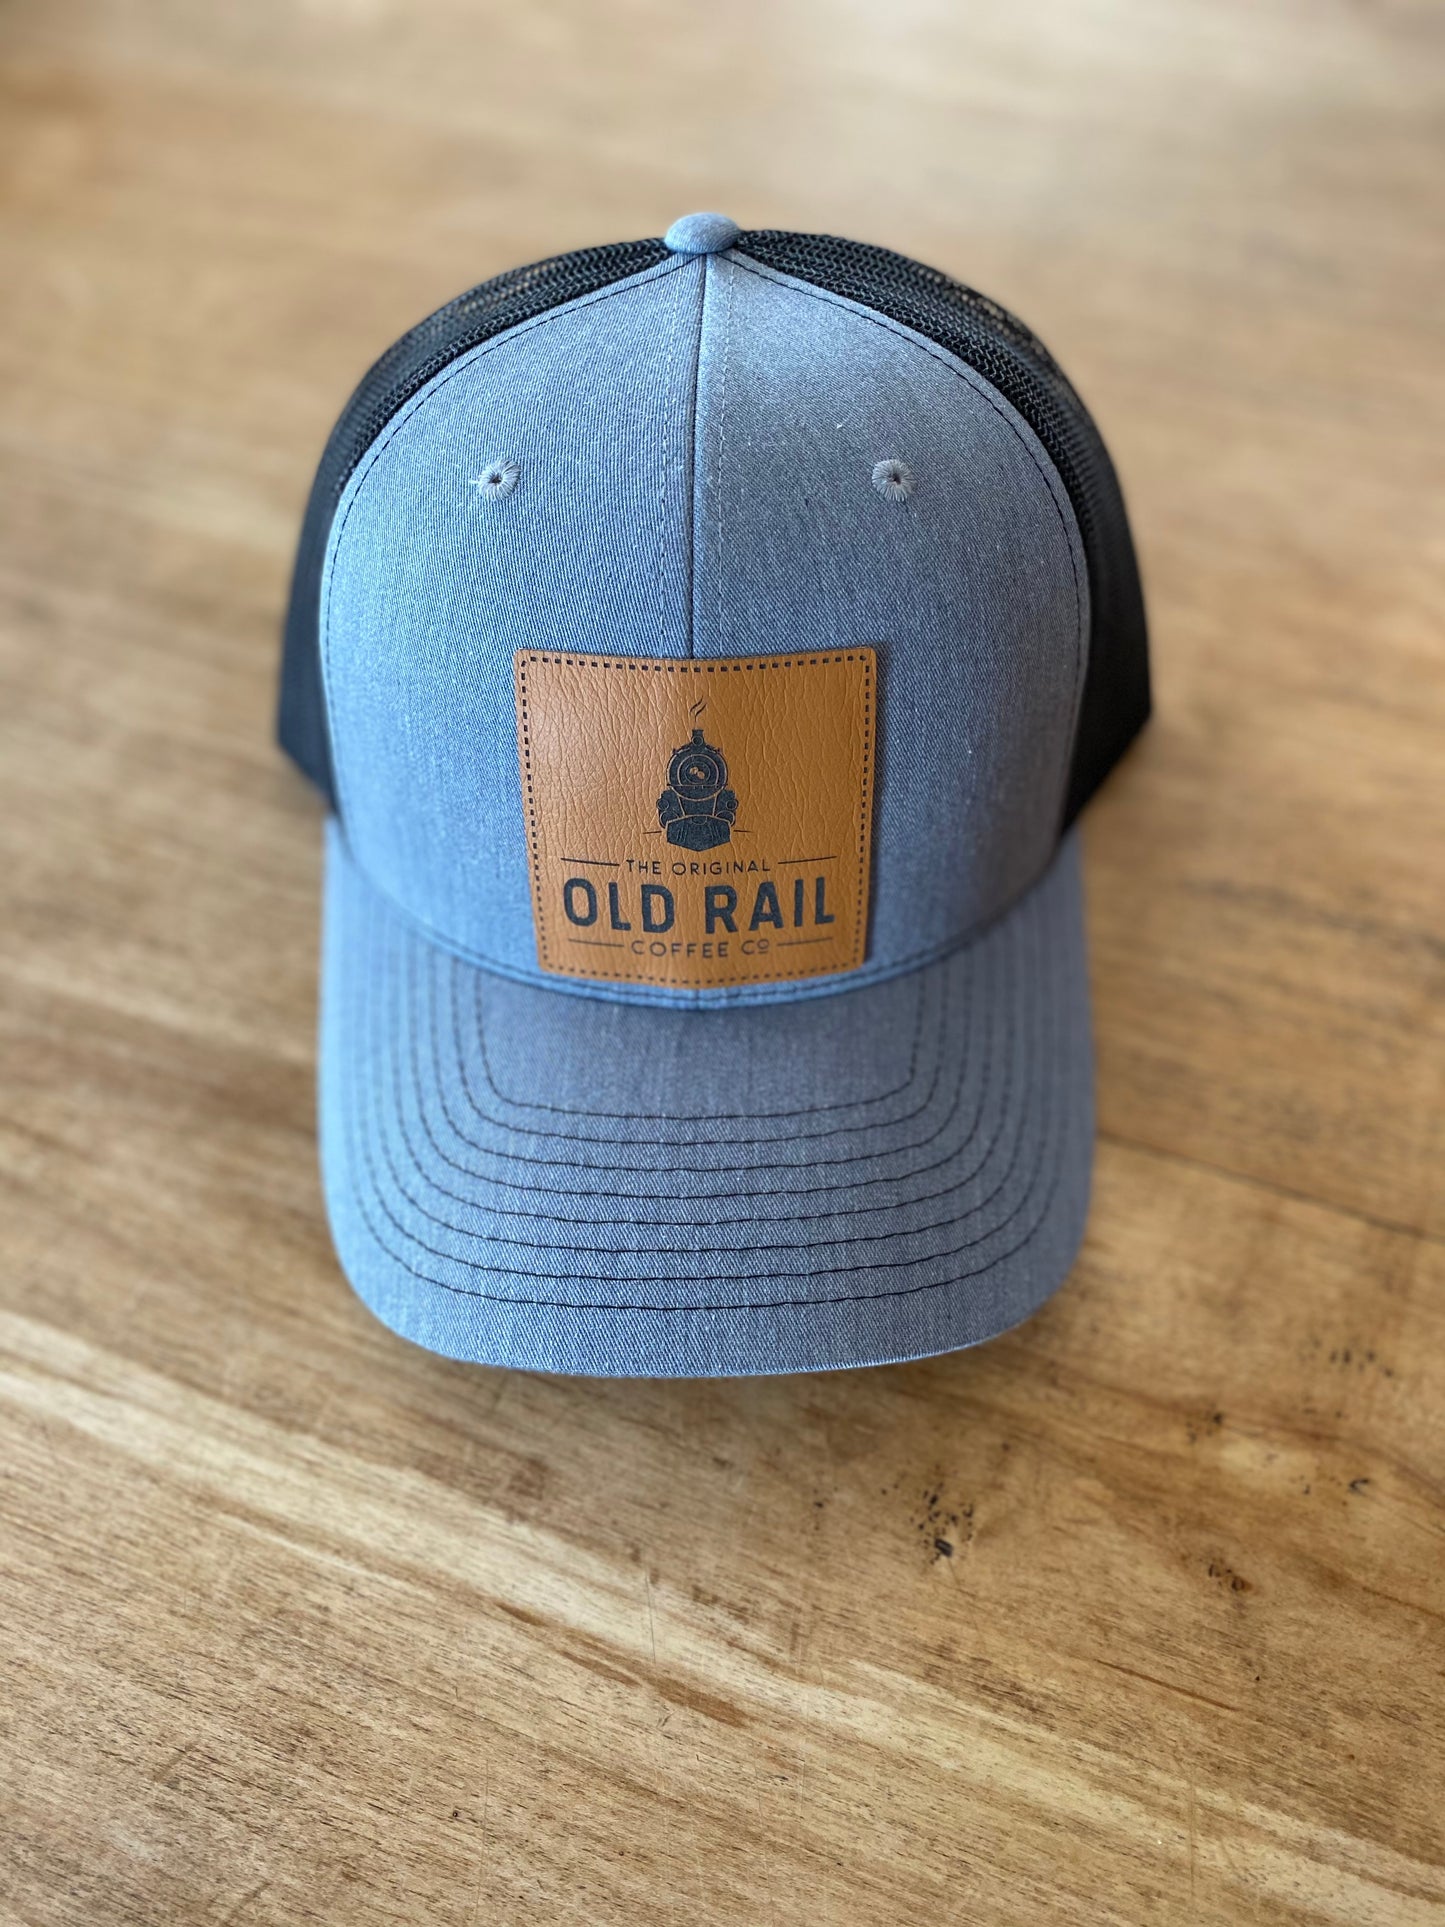 Old Rail Coffee Co Snapback, Blue, Black Mesh, Adjustable Snapback, Square Leather Patch Logo, Represent your favorite Coffee Company